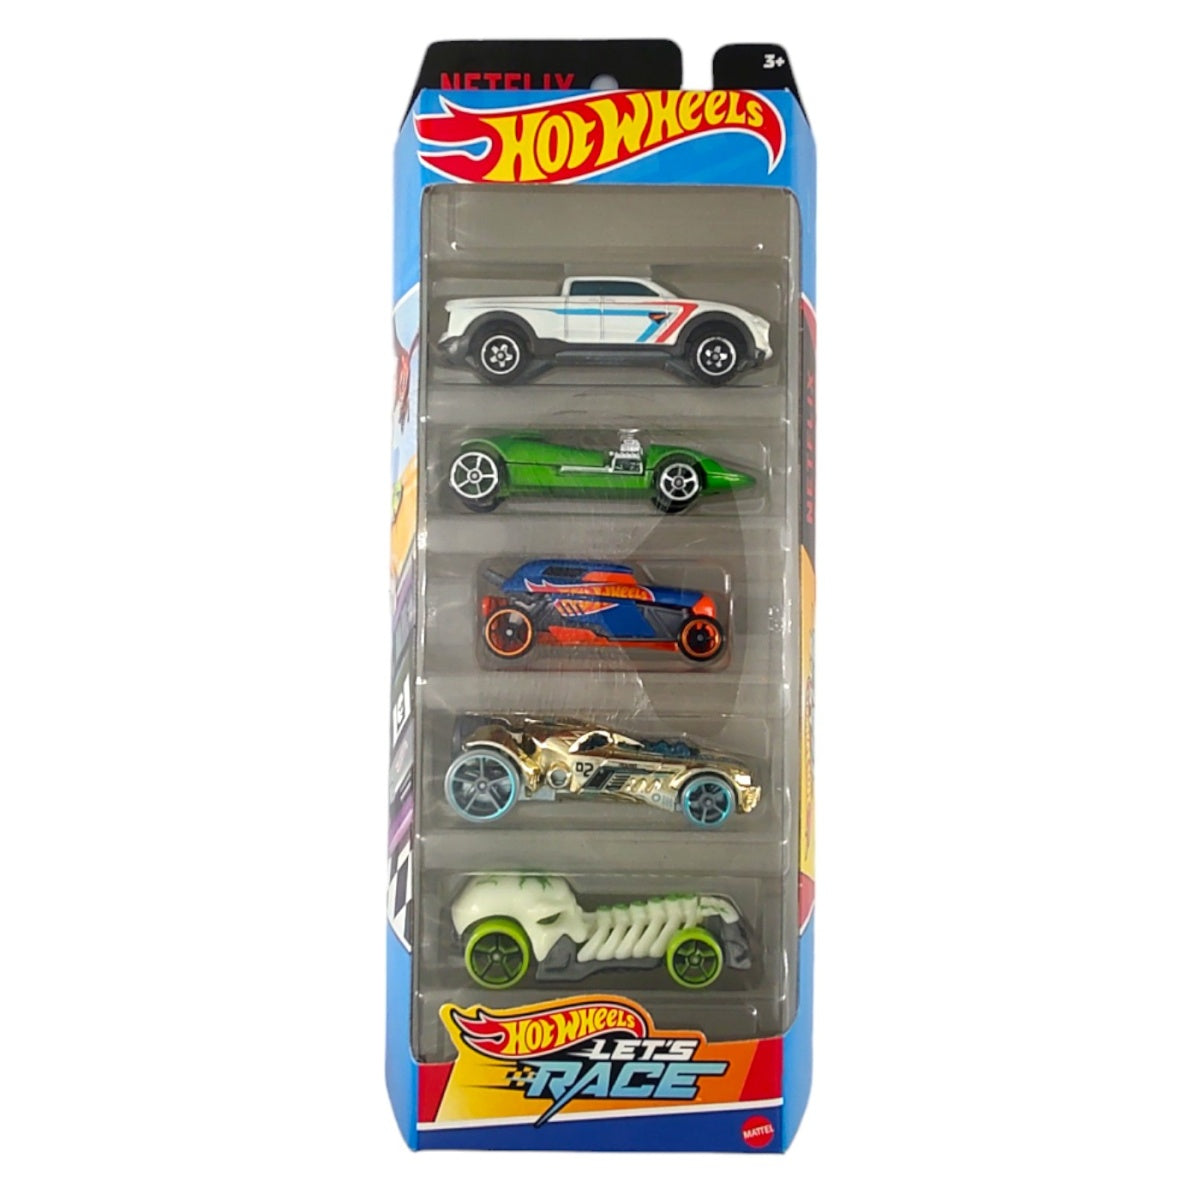 Hot Wheels 5 Car Gift Pack with 5 Premium Diecast Models - Design & Styles May Vary - Only 1 Pack Included